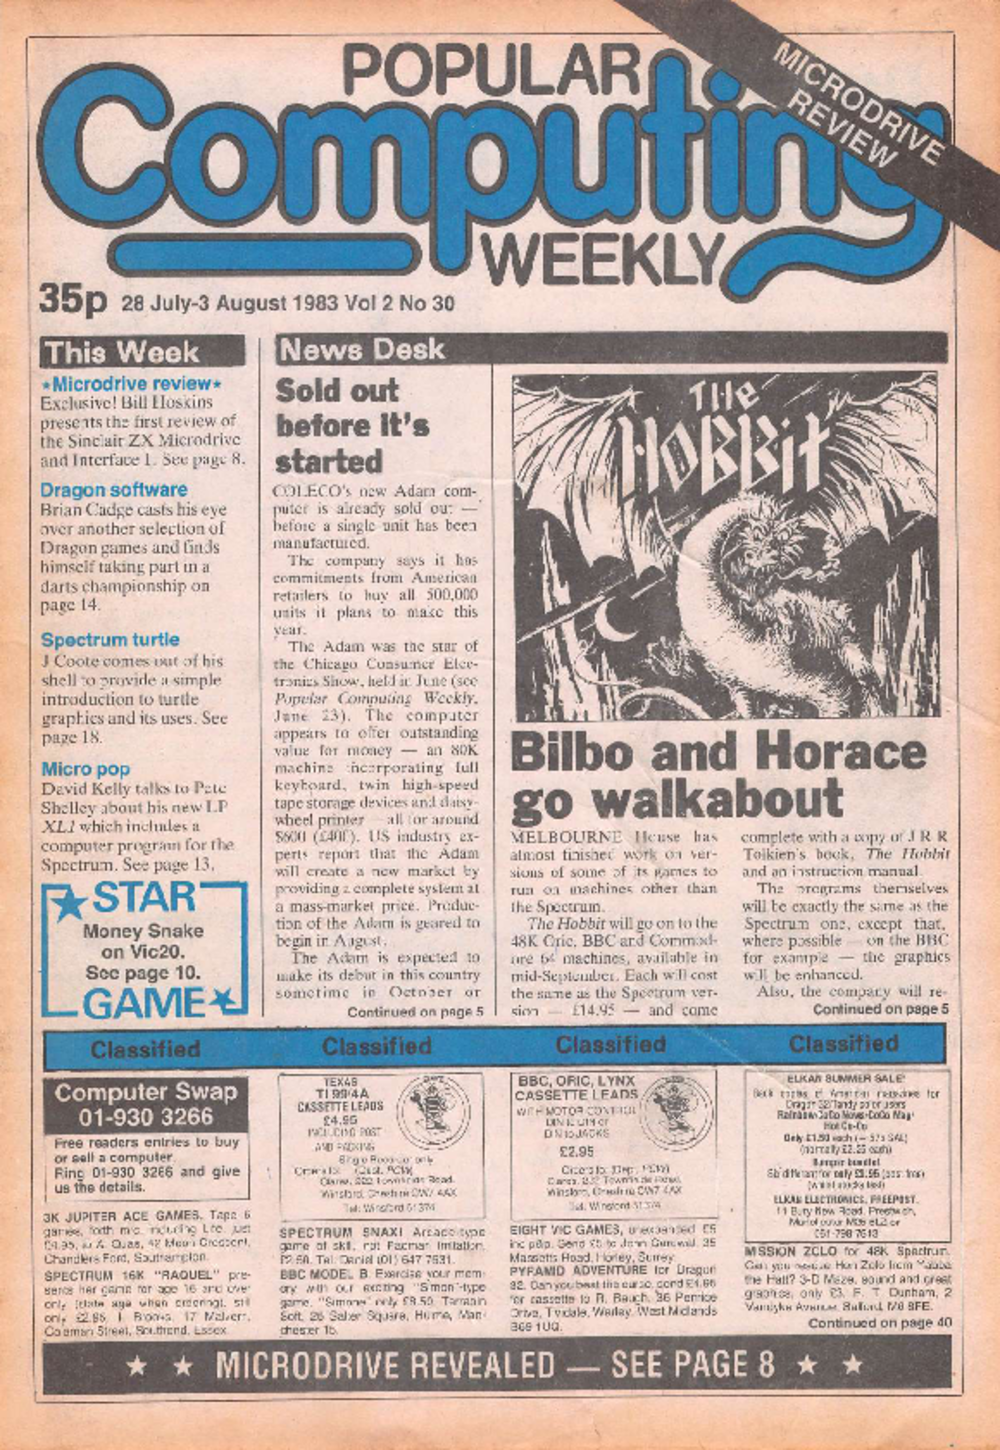 Article: Popular Computing Weekly Vol 2 No 30 - 28 July - 3 August 1983